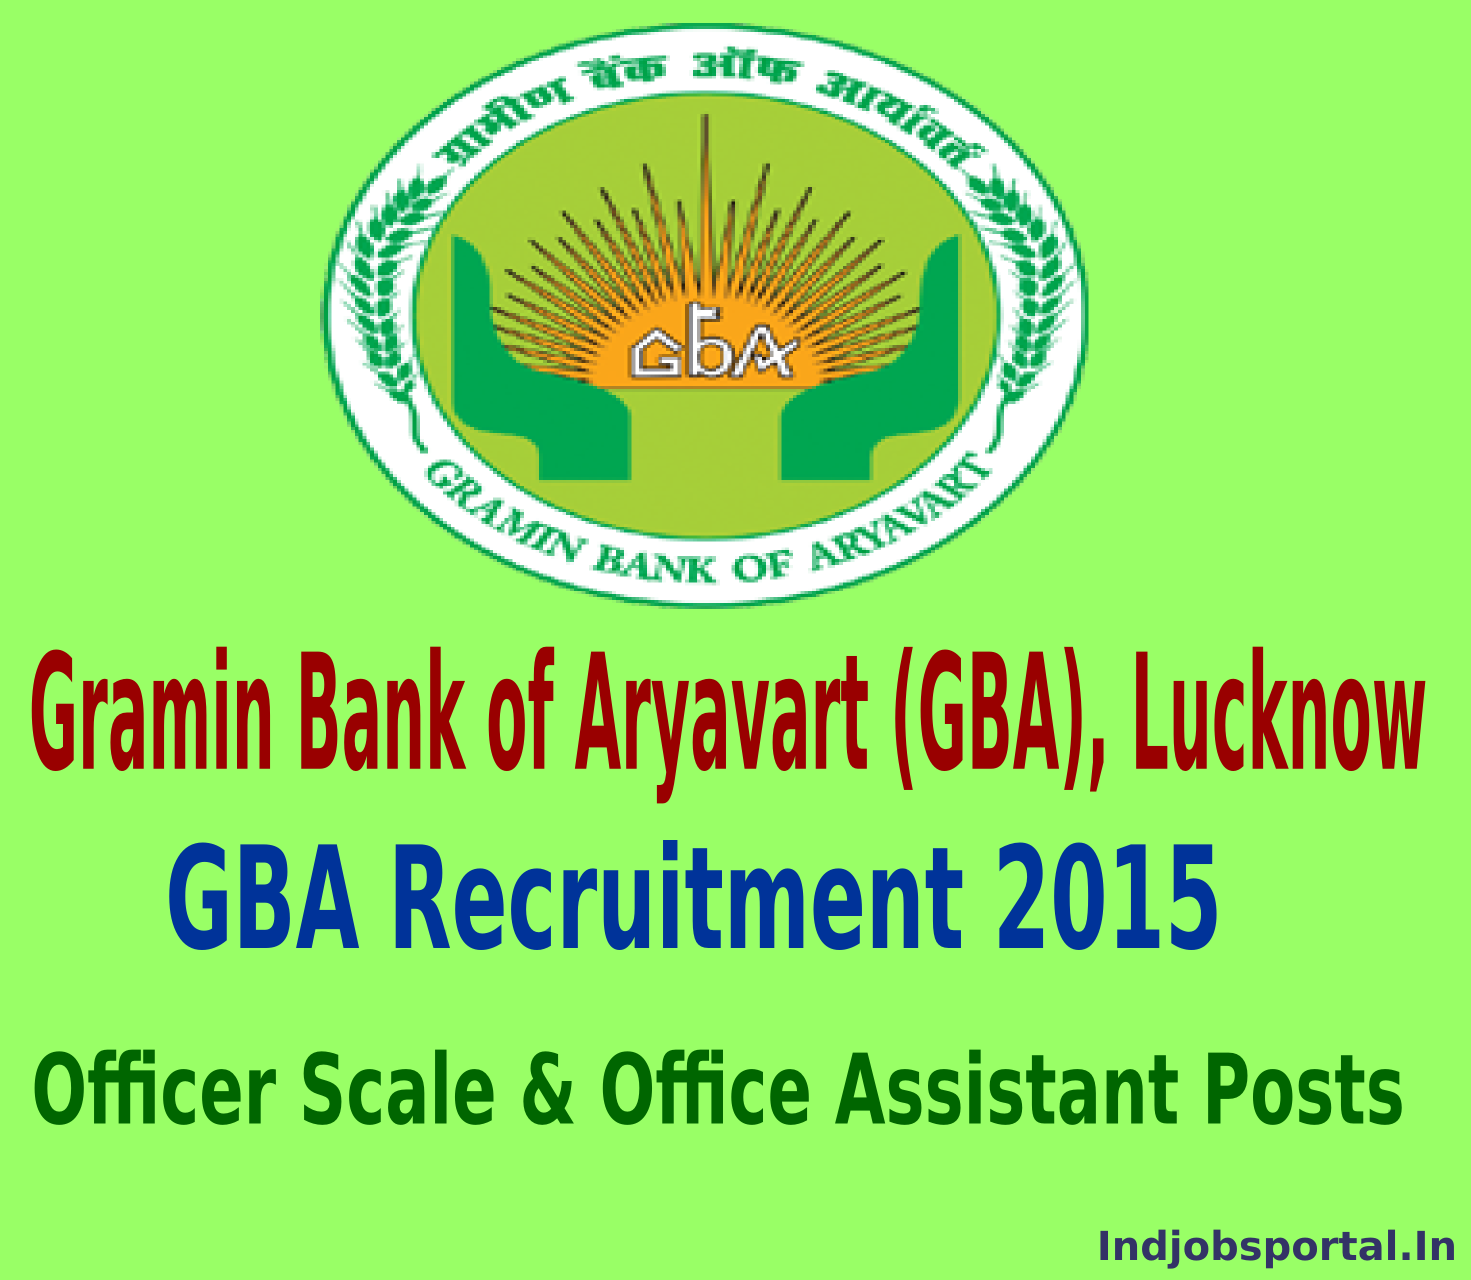 Gramin Bank of Aryavart (GBA),Lucknow Recruitment 2015 For 493 Officer Scale & Office Assistant Posts